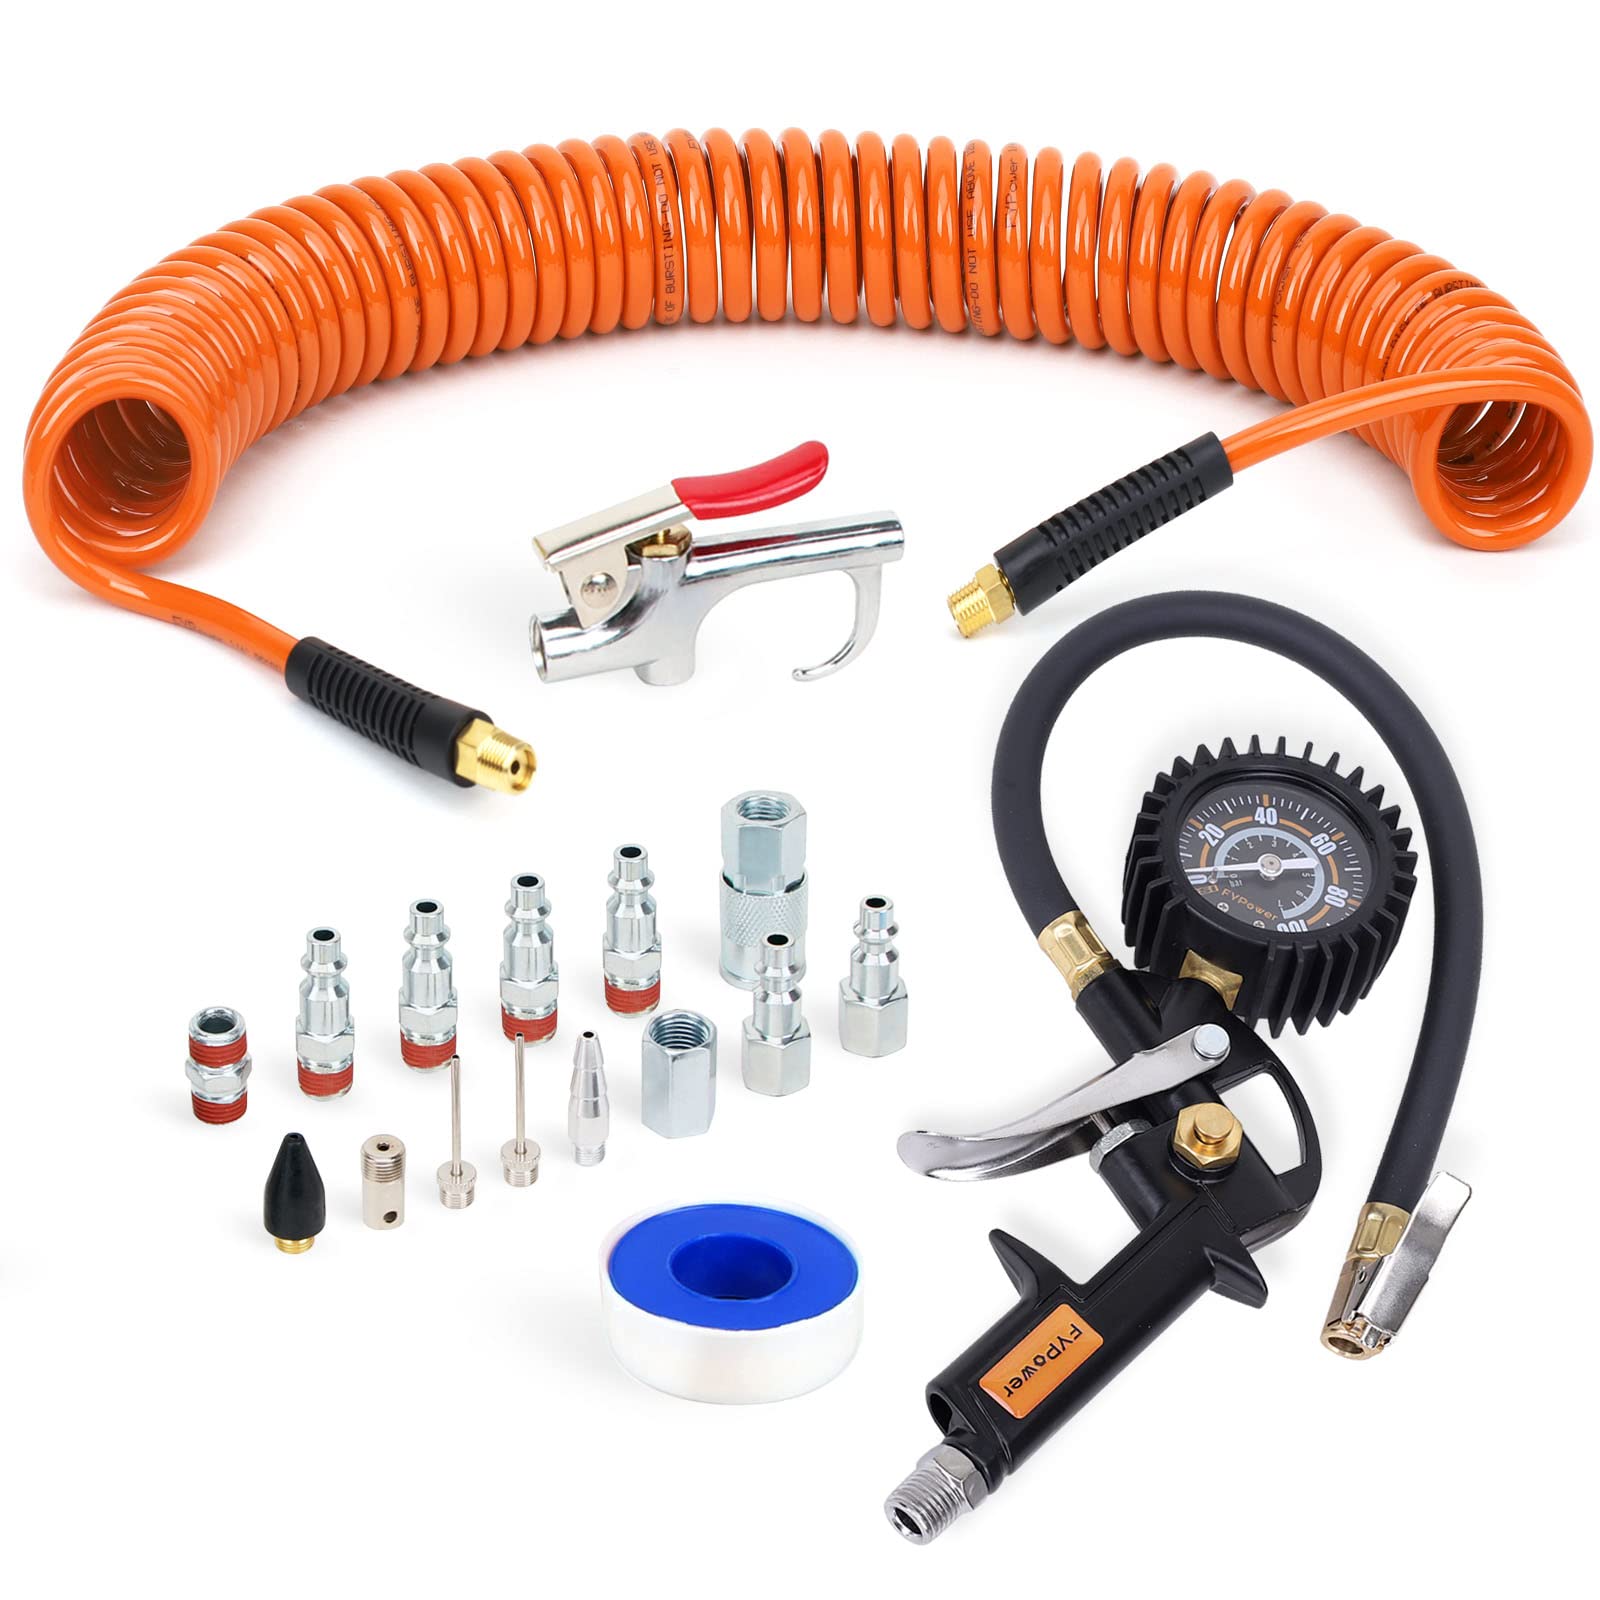 FYPower 18 Pieces Air Compressor Accessories kit, 1/4 inch x 25 ft Recoil Poly Air Compressor Hose Kit, 1/4" NPT Quick Connect Air Fittings, 100 PSI Tire Inflator Gauge, Heavy Duty Blow Gun